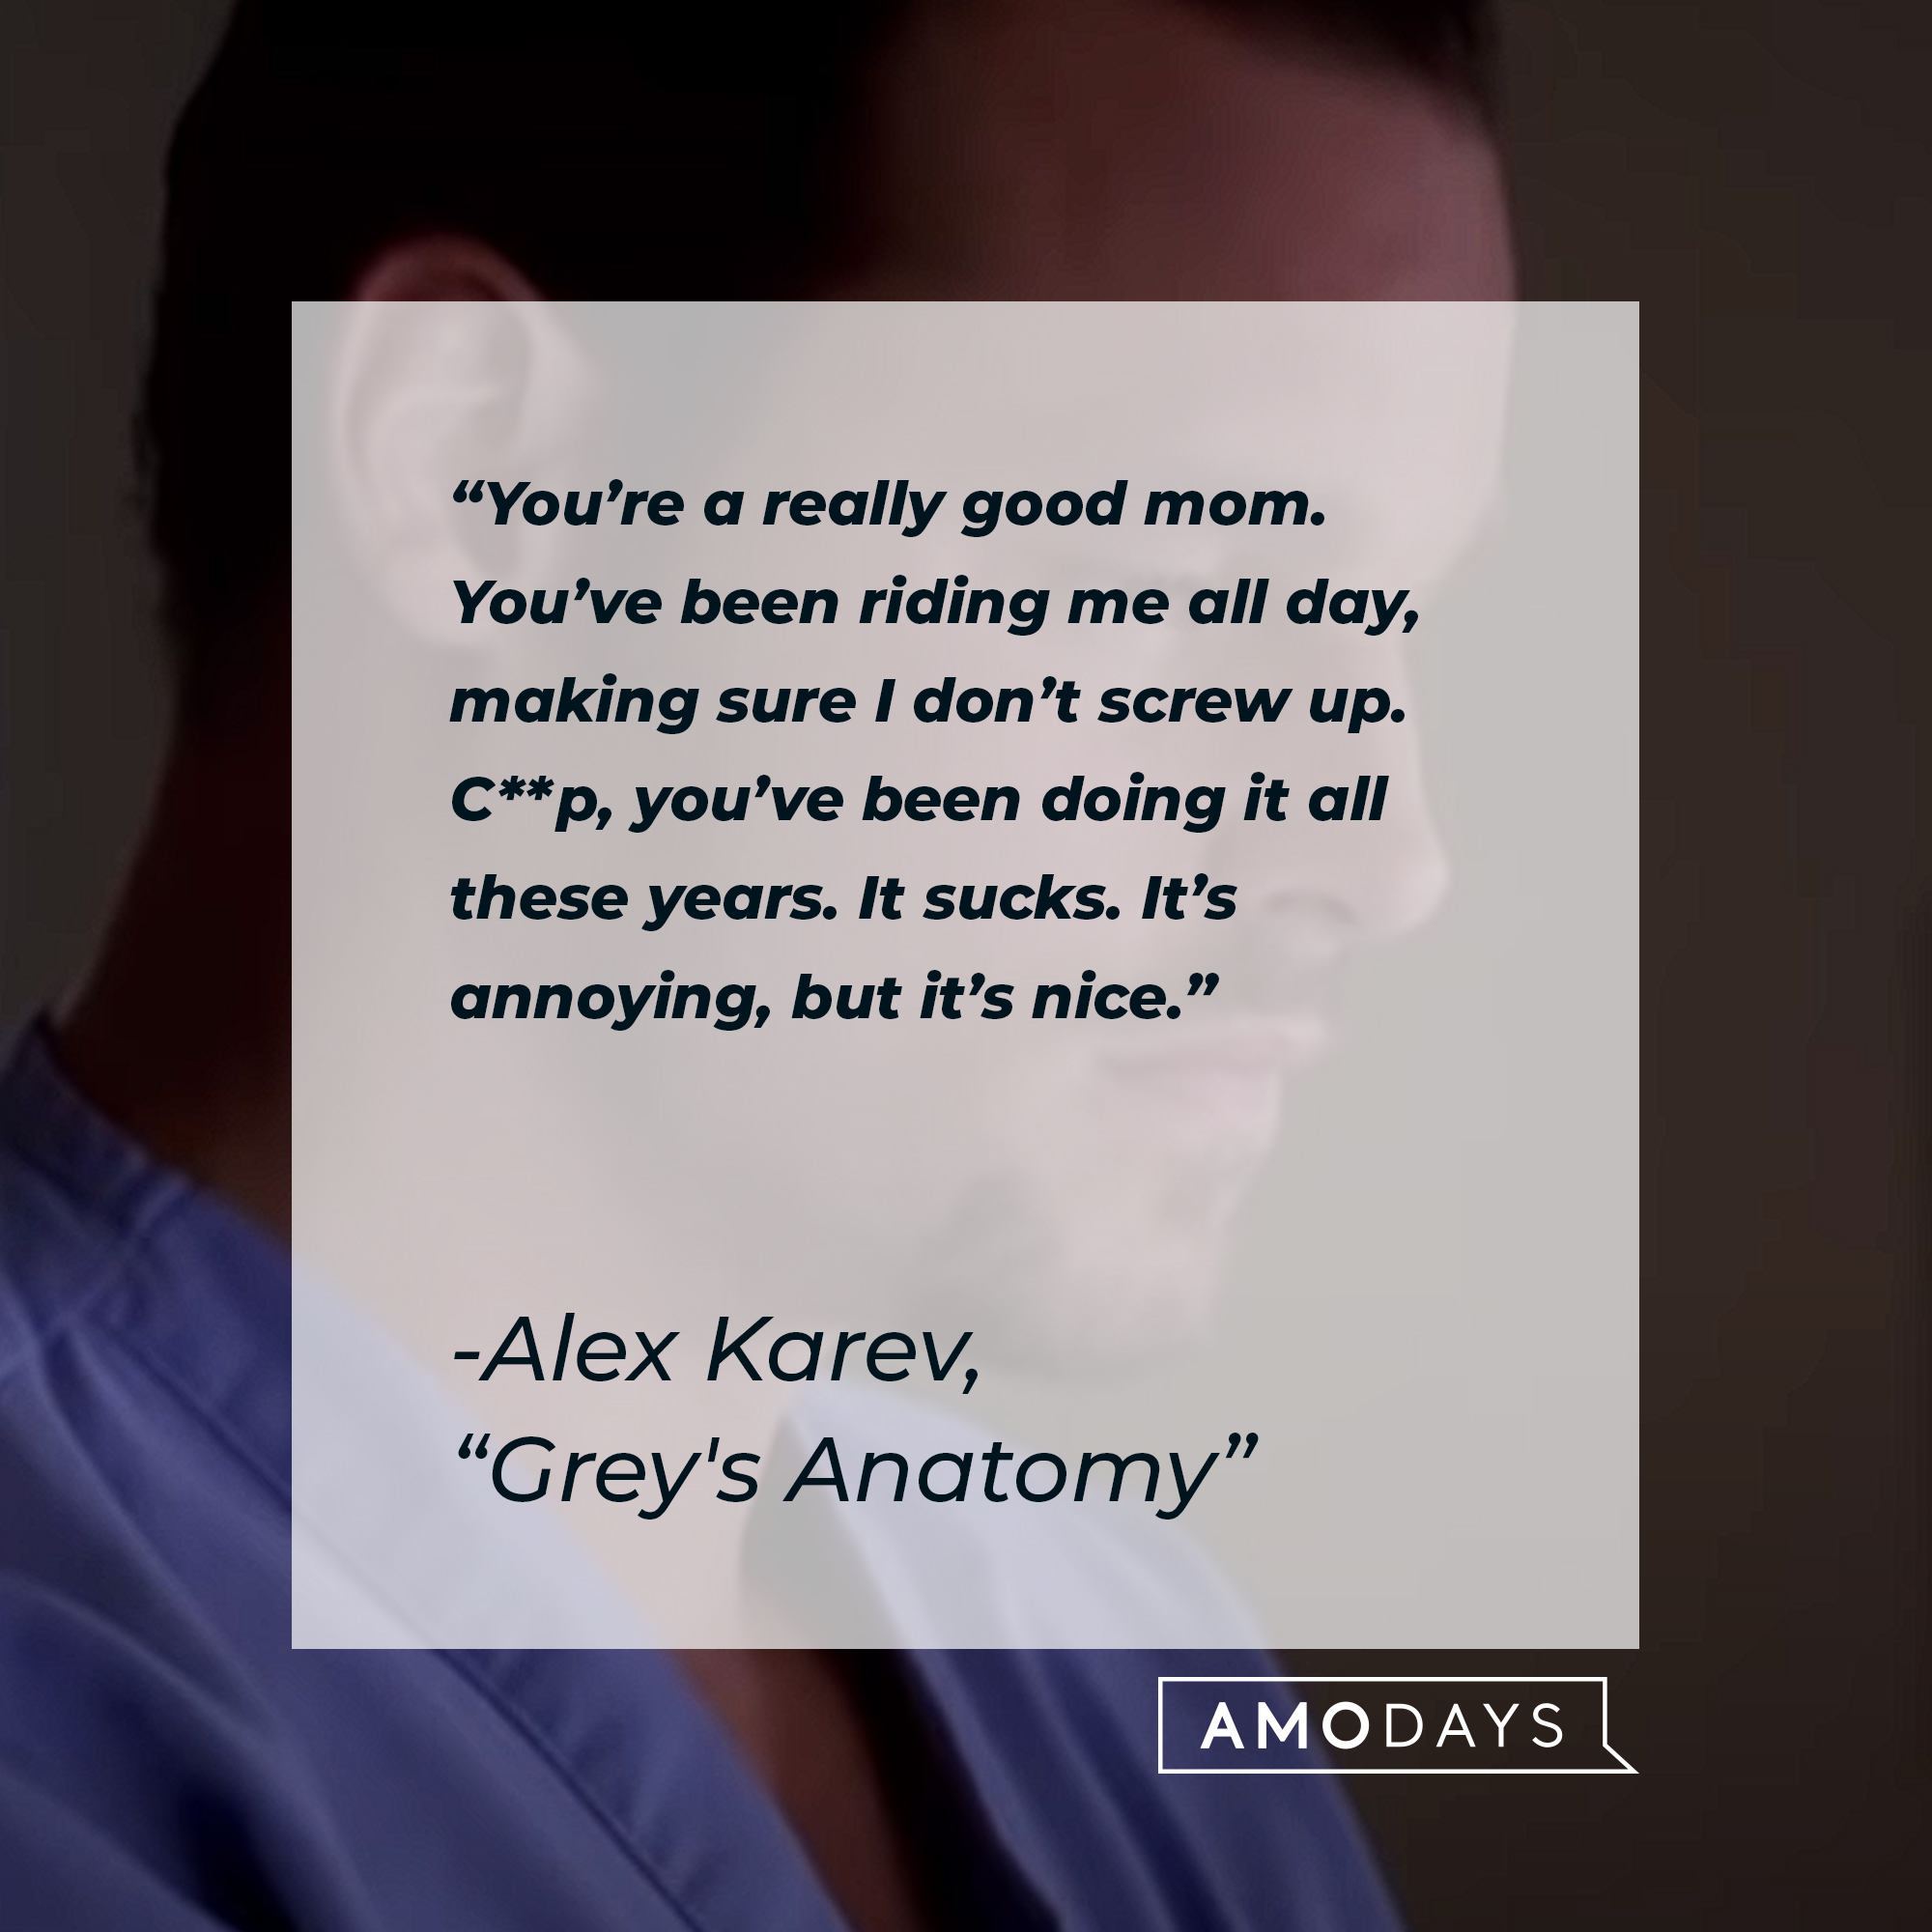 Alex Karev’s quote from “Grey’s Anatomy”: “You’re a really good mom. You’ve been riding me all day, making sure I don’t screw up. C**p, you’ve been doing it all these years. It sucks. It’s annoying, but it’s nice.” | Source: youtube.com/ABCNetworkAlex 